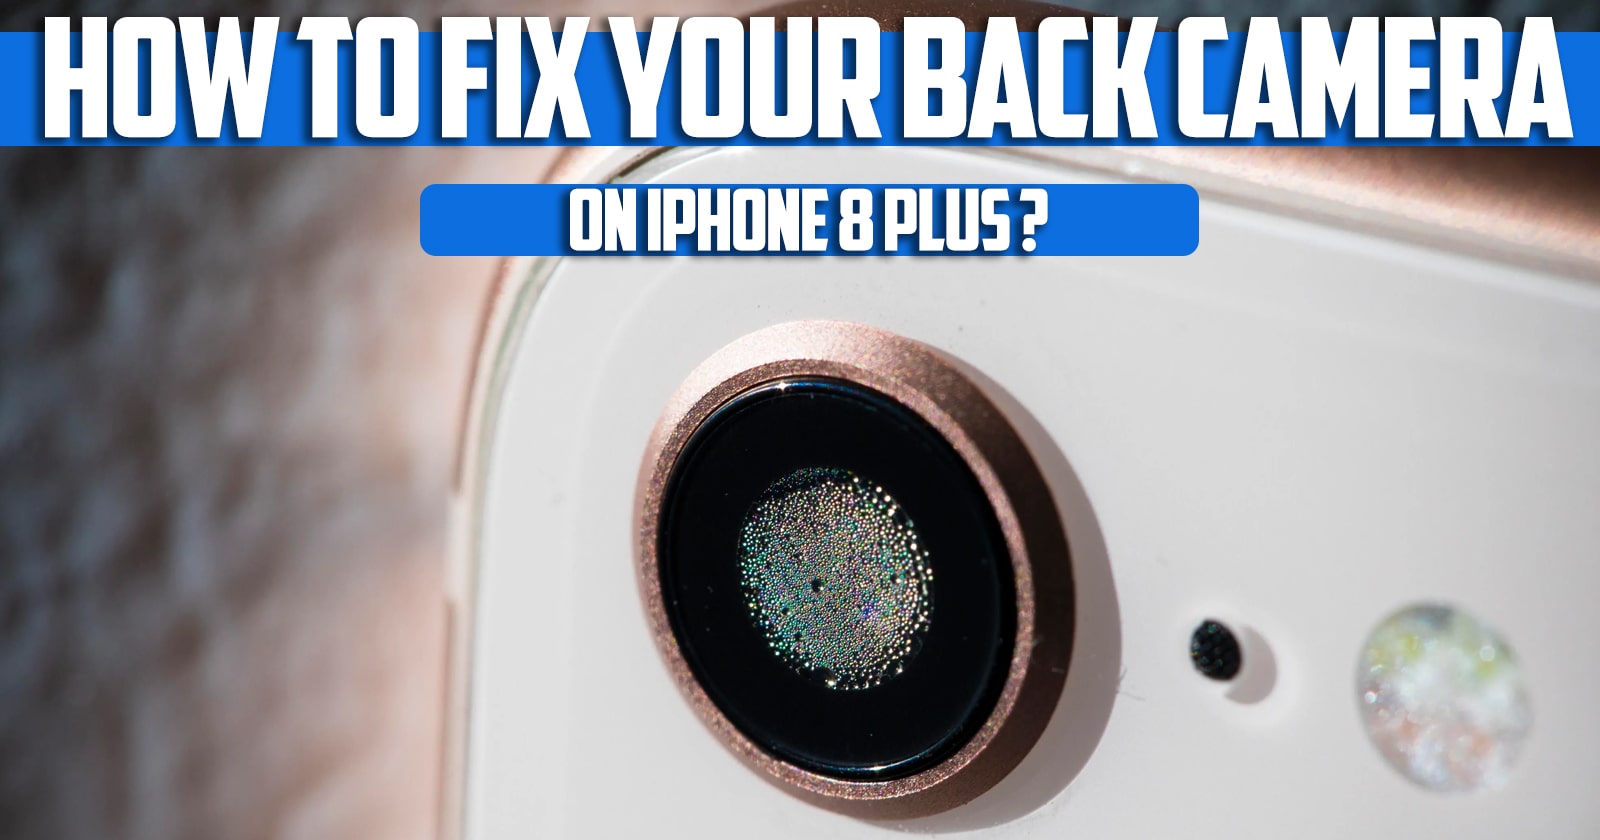 How to fix your back camera on iPhone 8 plus ؟